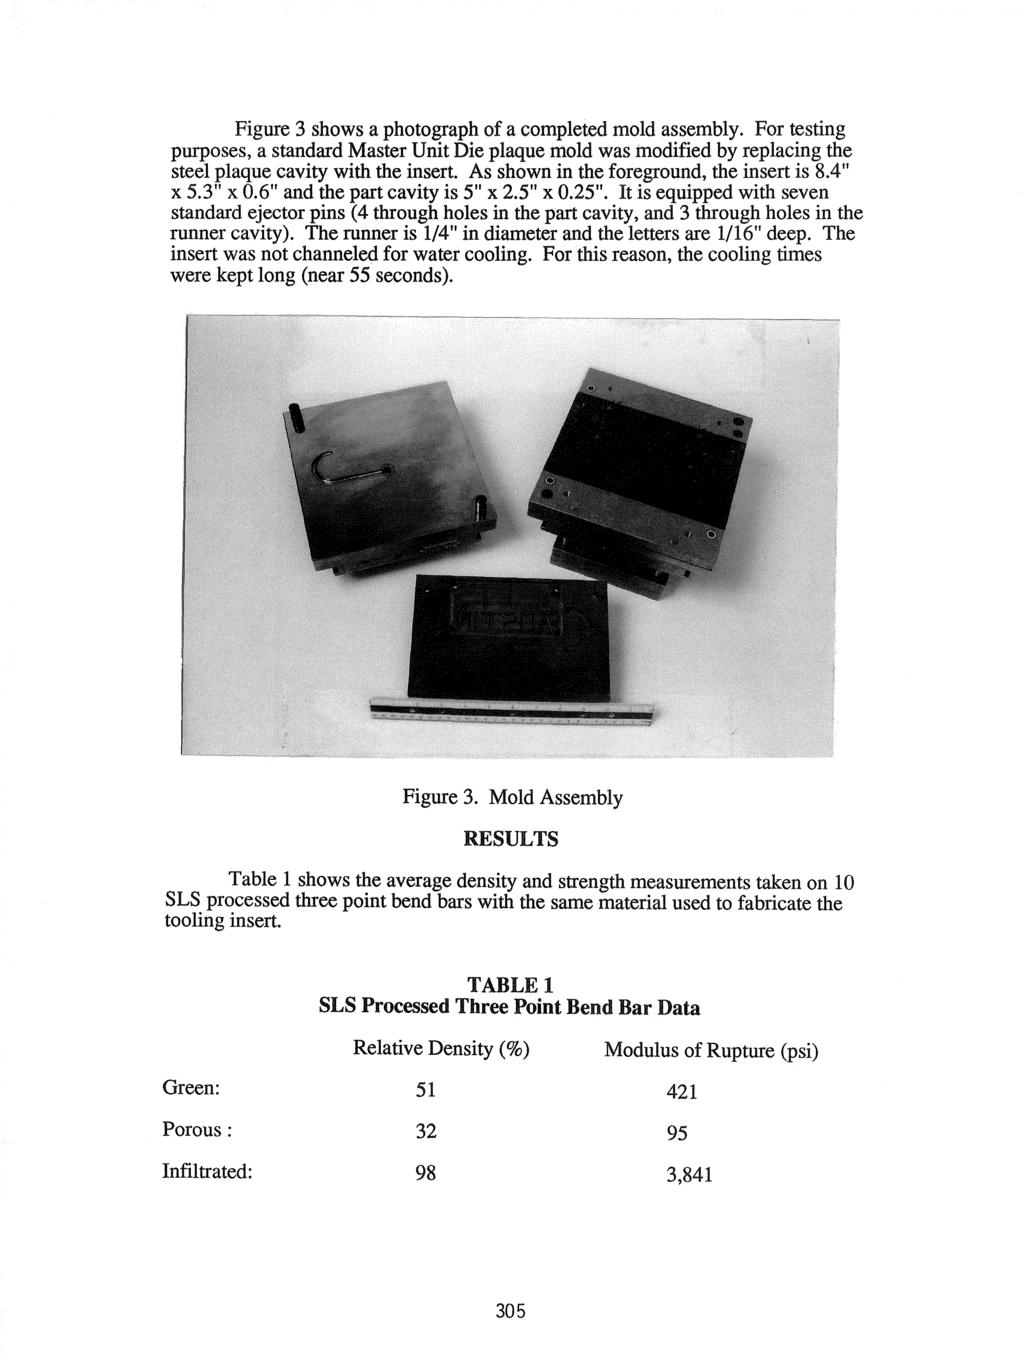 Figure 3 shows a photograph of a completed mold assembly. For testing purposes, a standard Master Unit Die plaque mold was modified by replacing the steel plaque cavity with the insert.